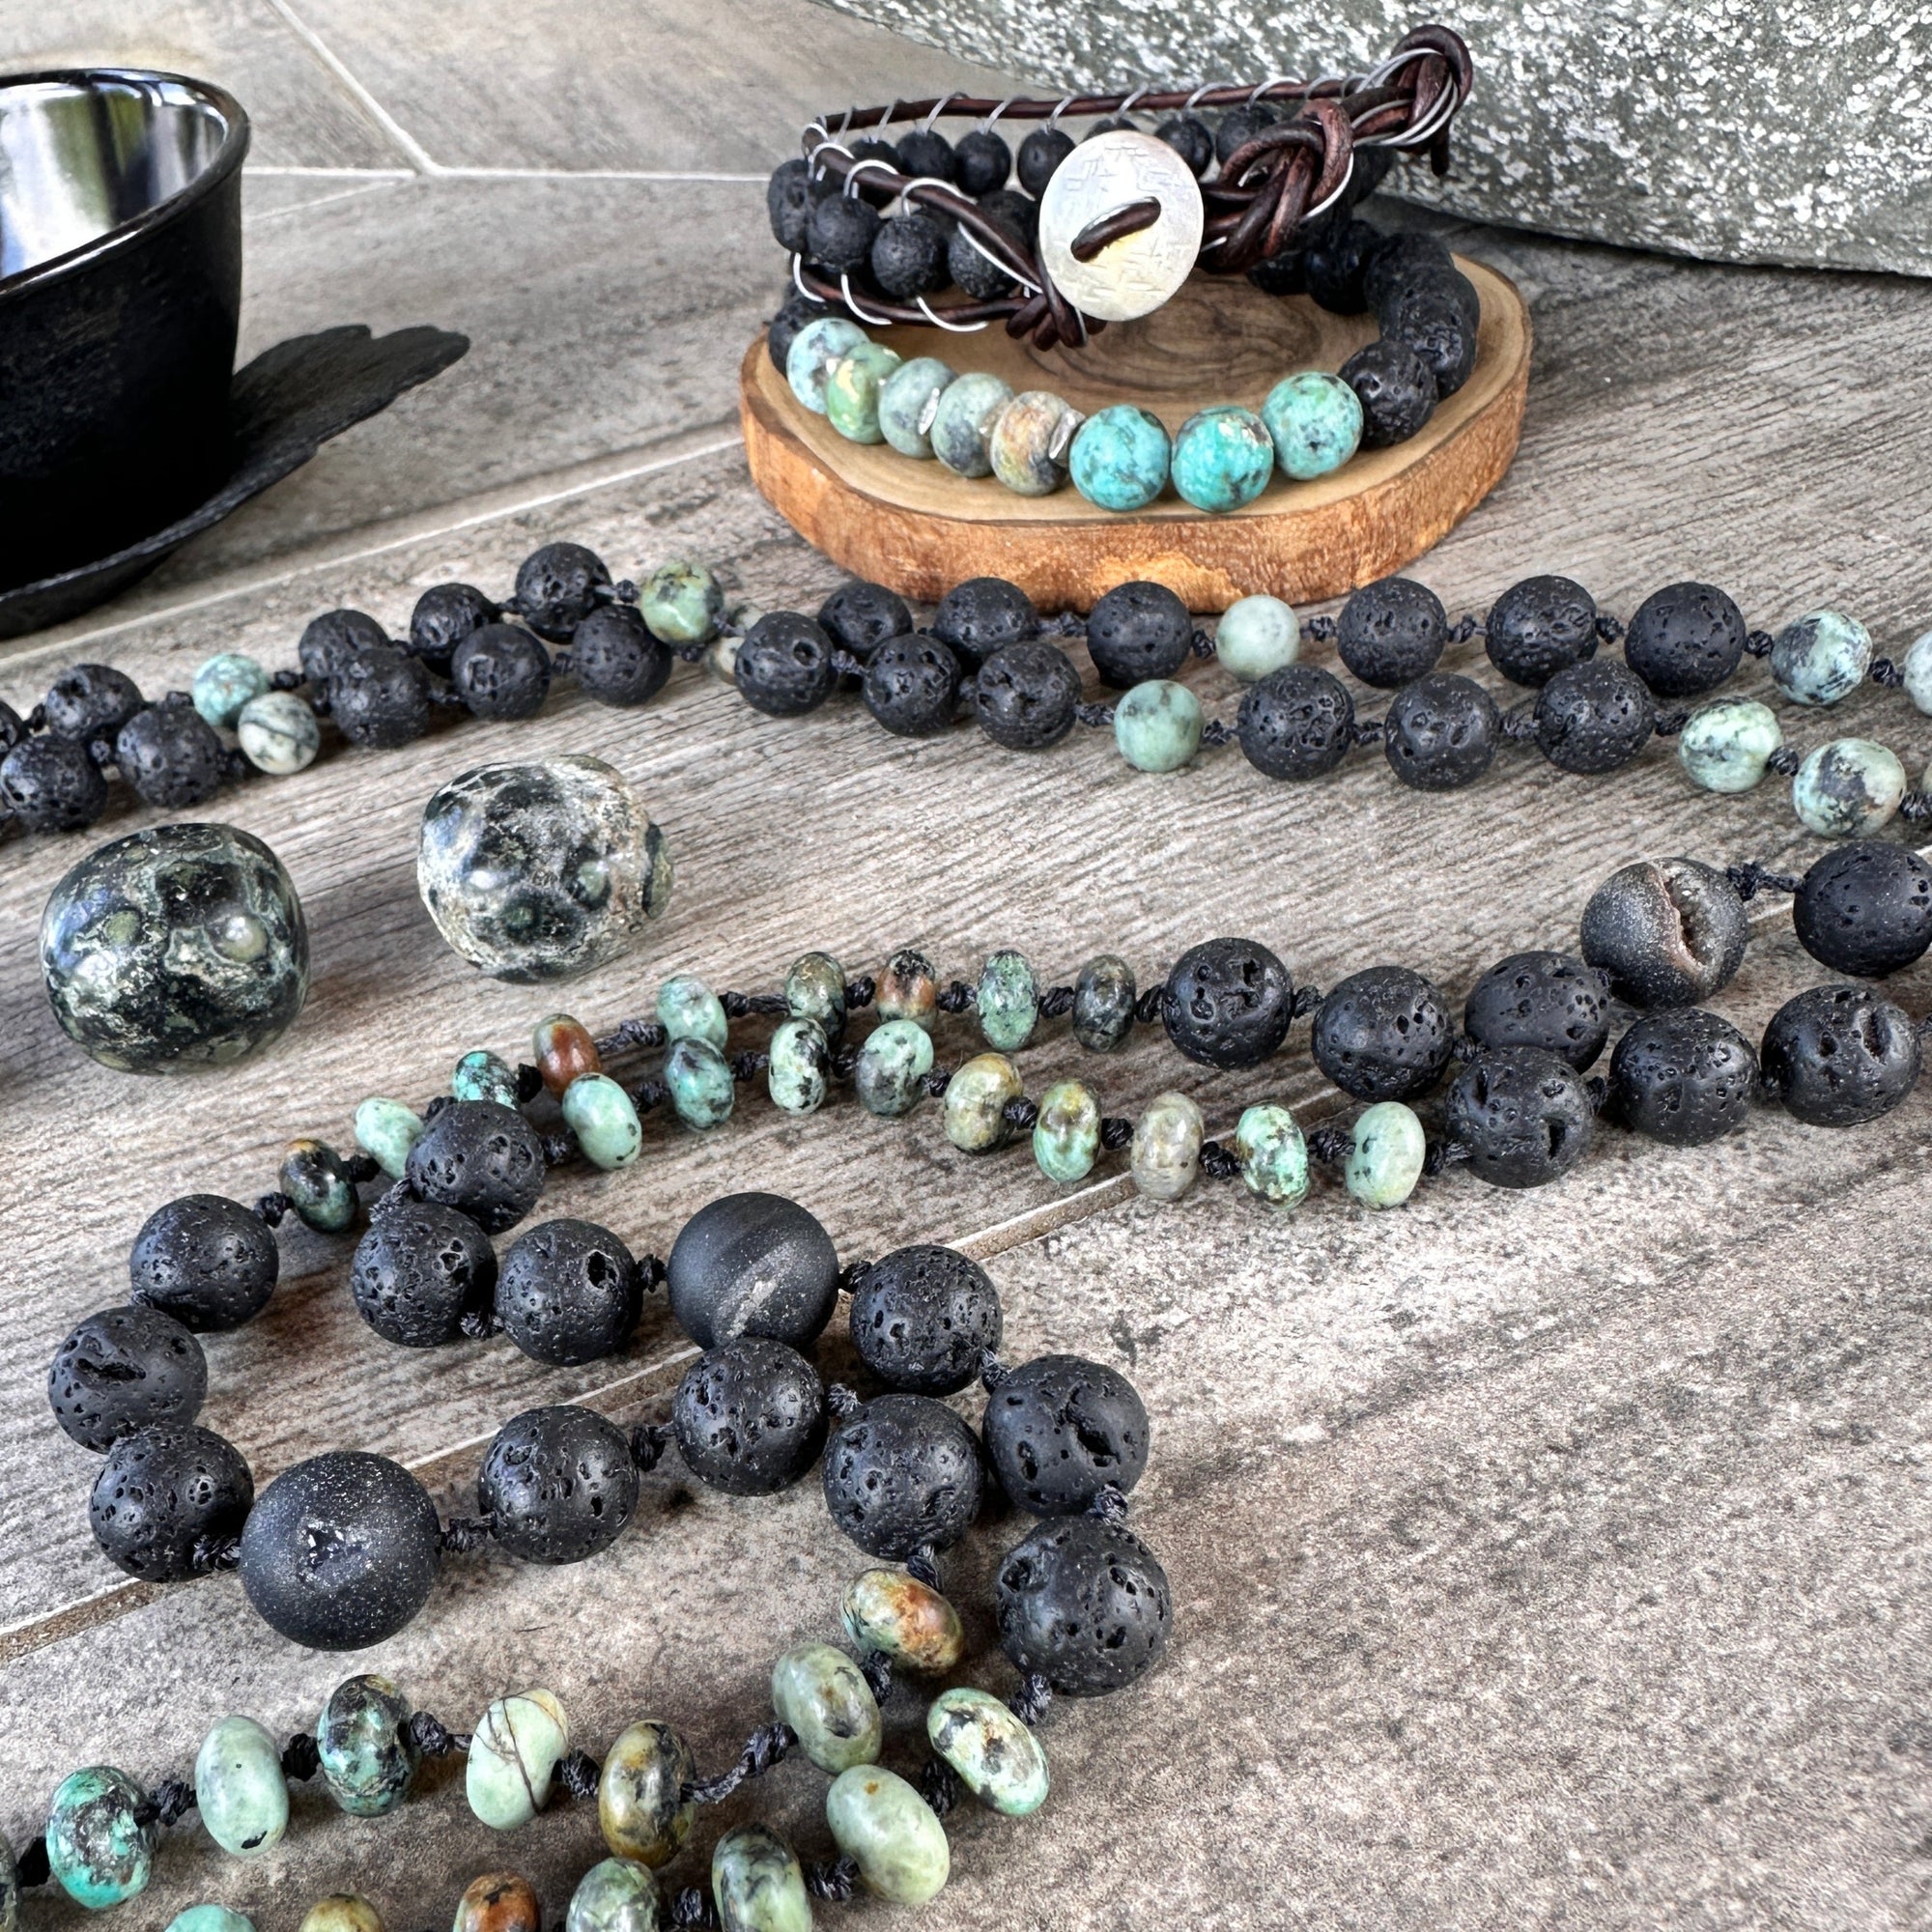 Handcrafted mala  and bracelets with vibrant transformation-inspired beads